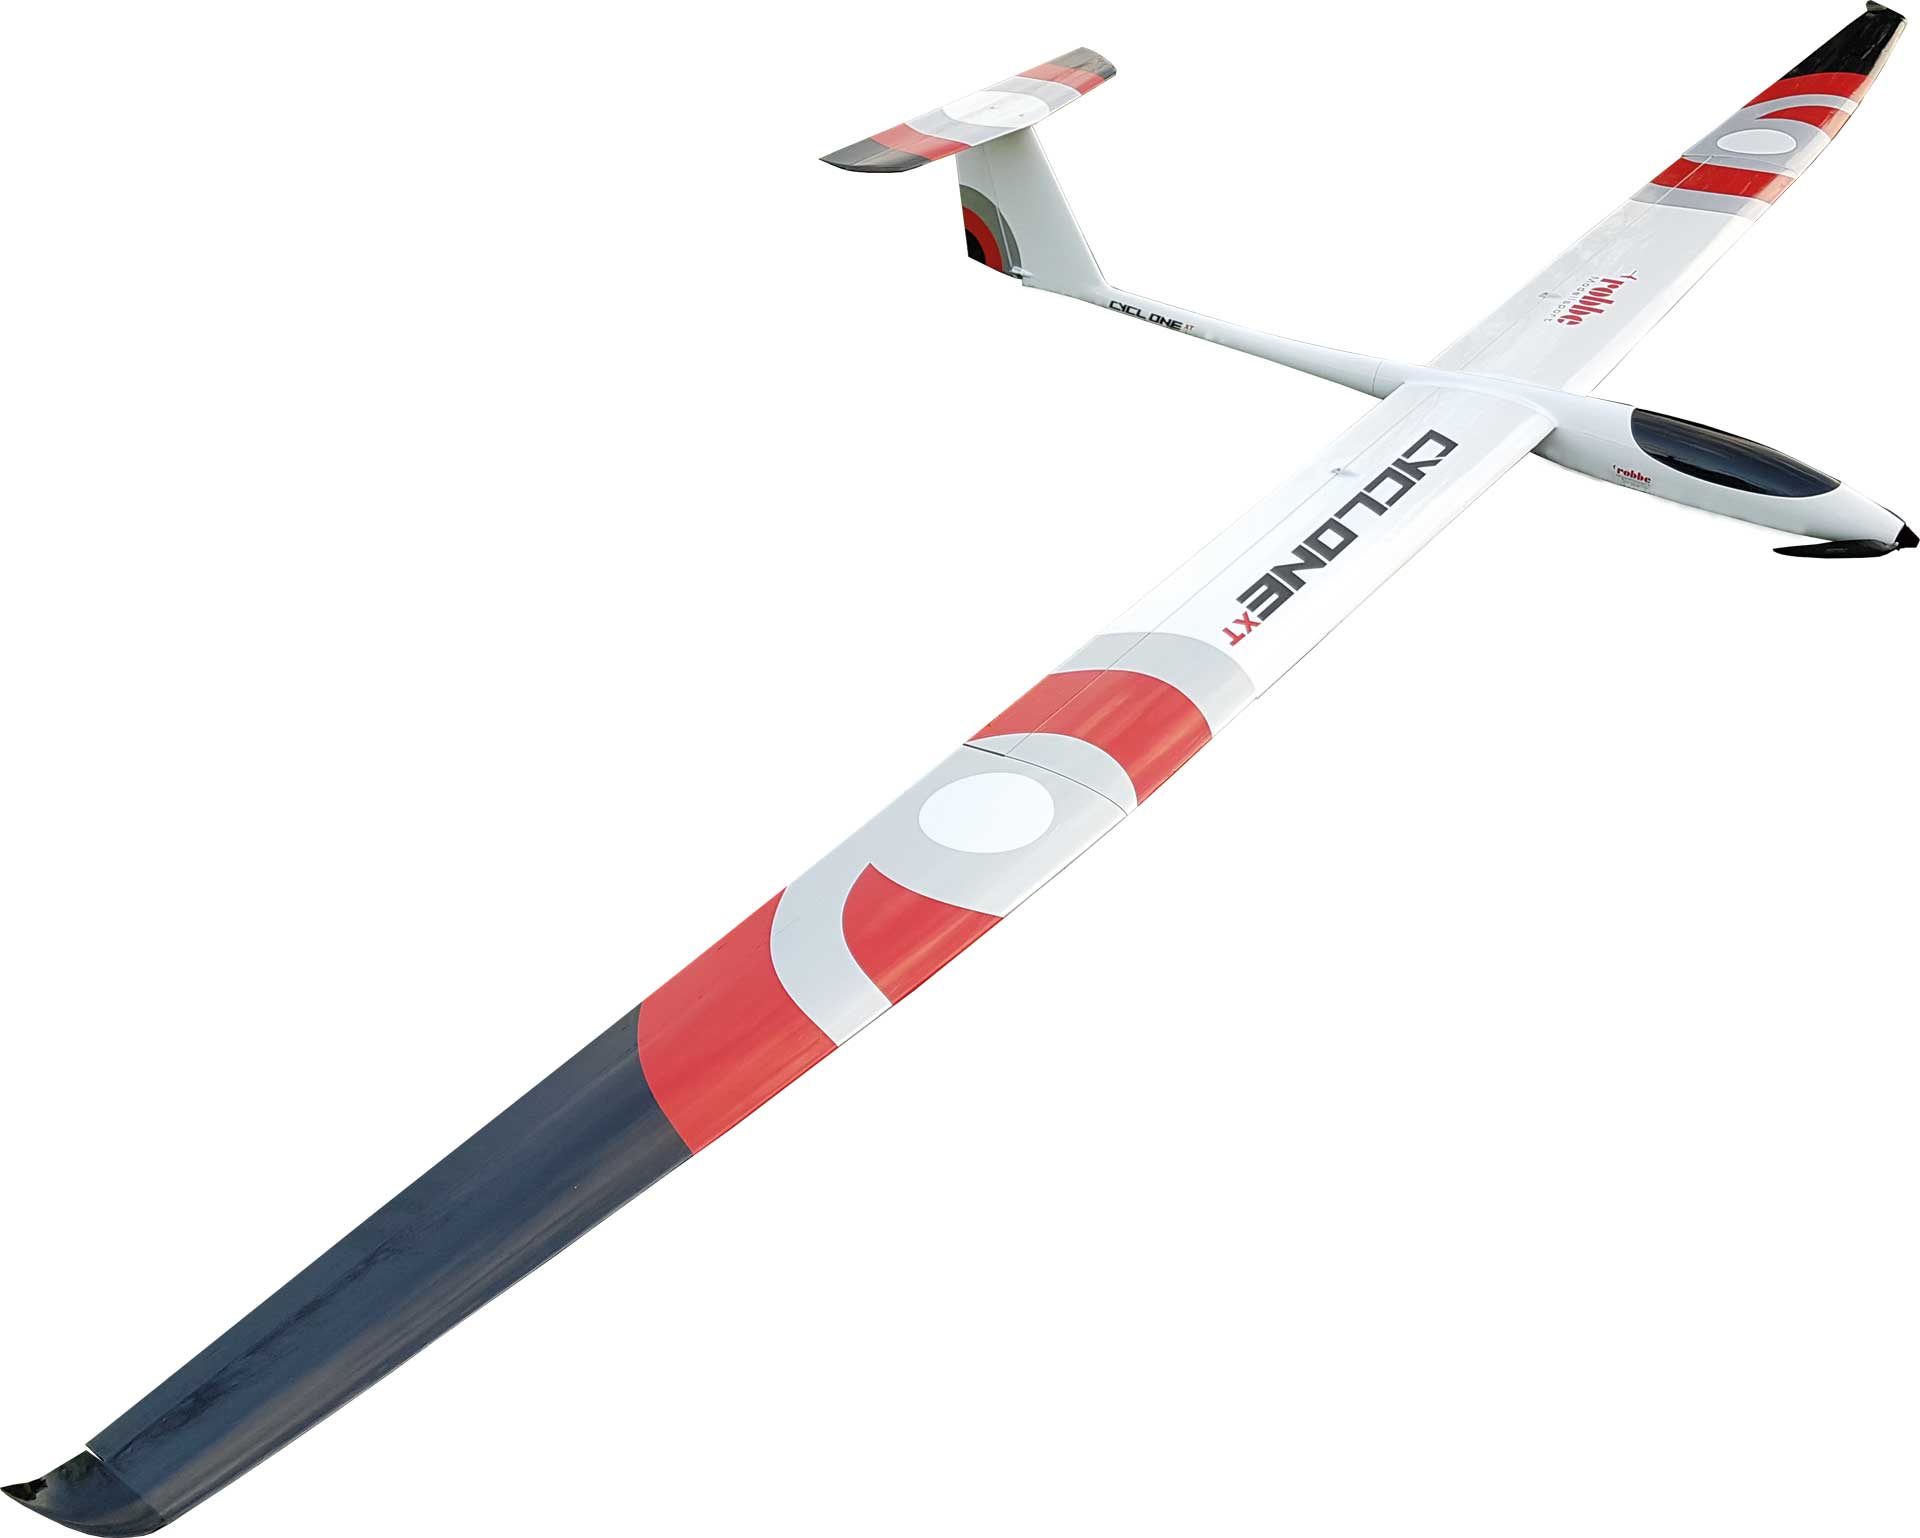 Robbe Modellsport Cyclone XT 6,2M ARF mit GDRP FUSELAGE 4-piece wing with abachi planking